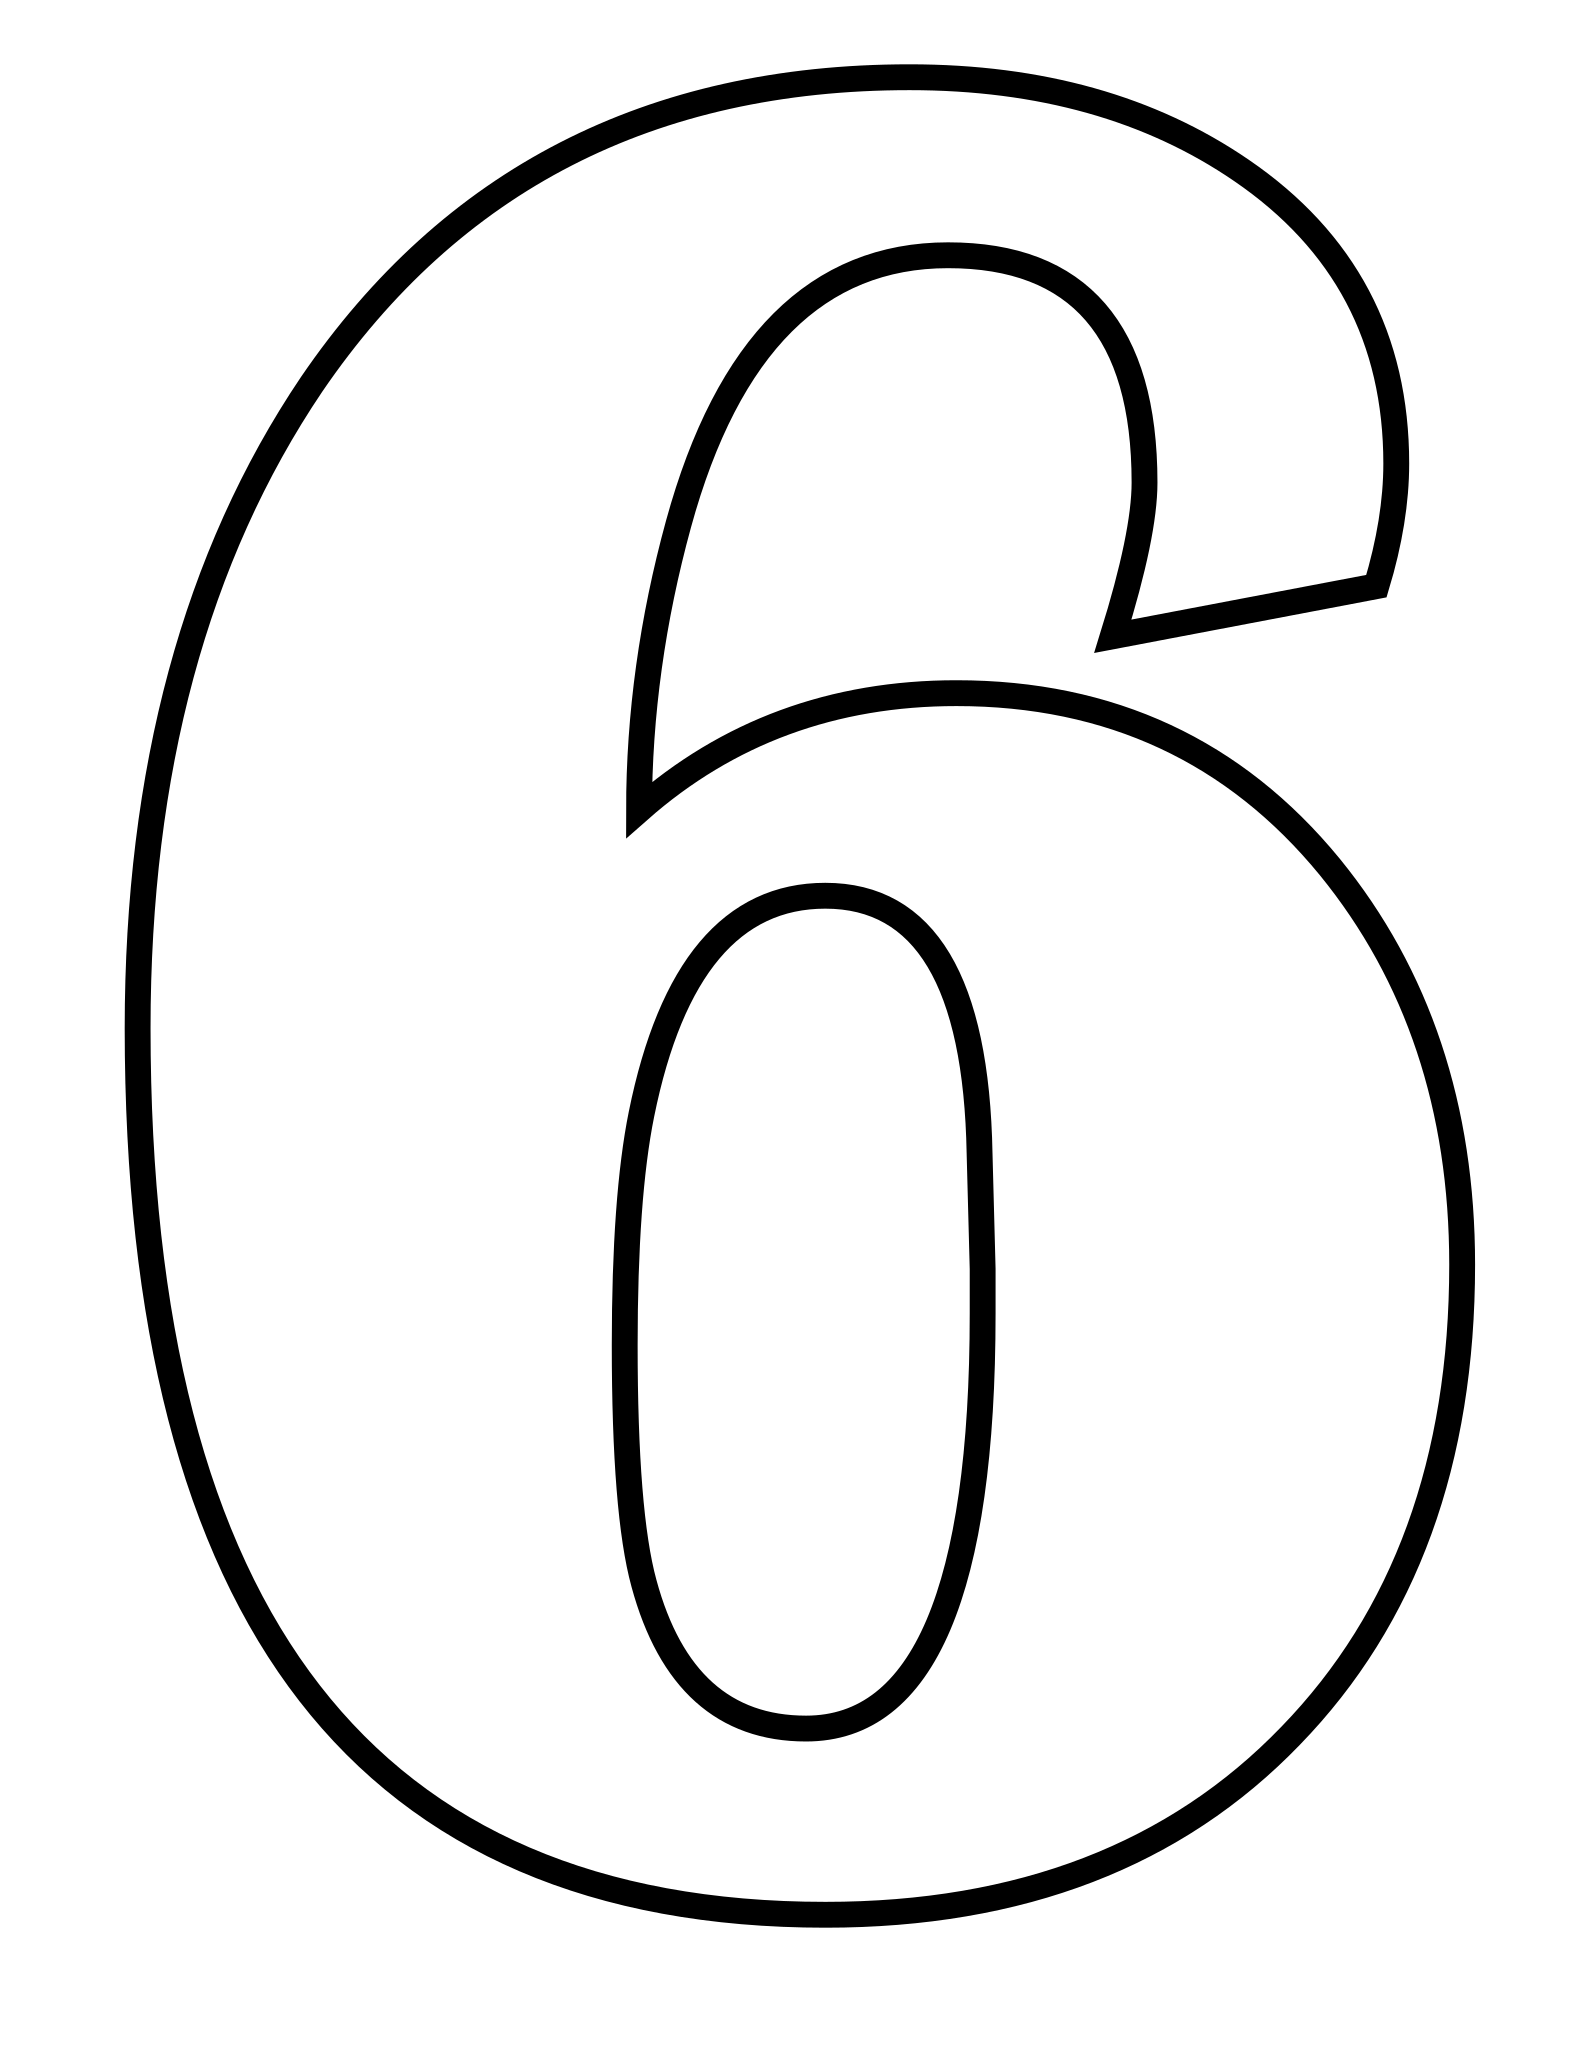 File:Classic alphabet numbers 6 at coloring-pages-for-kids-boys-dotcom.svg  - Wikimedia Commons